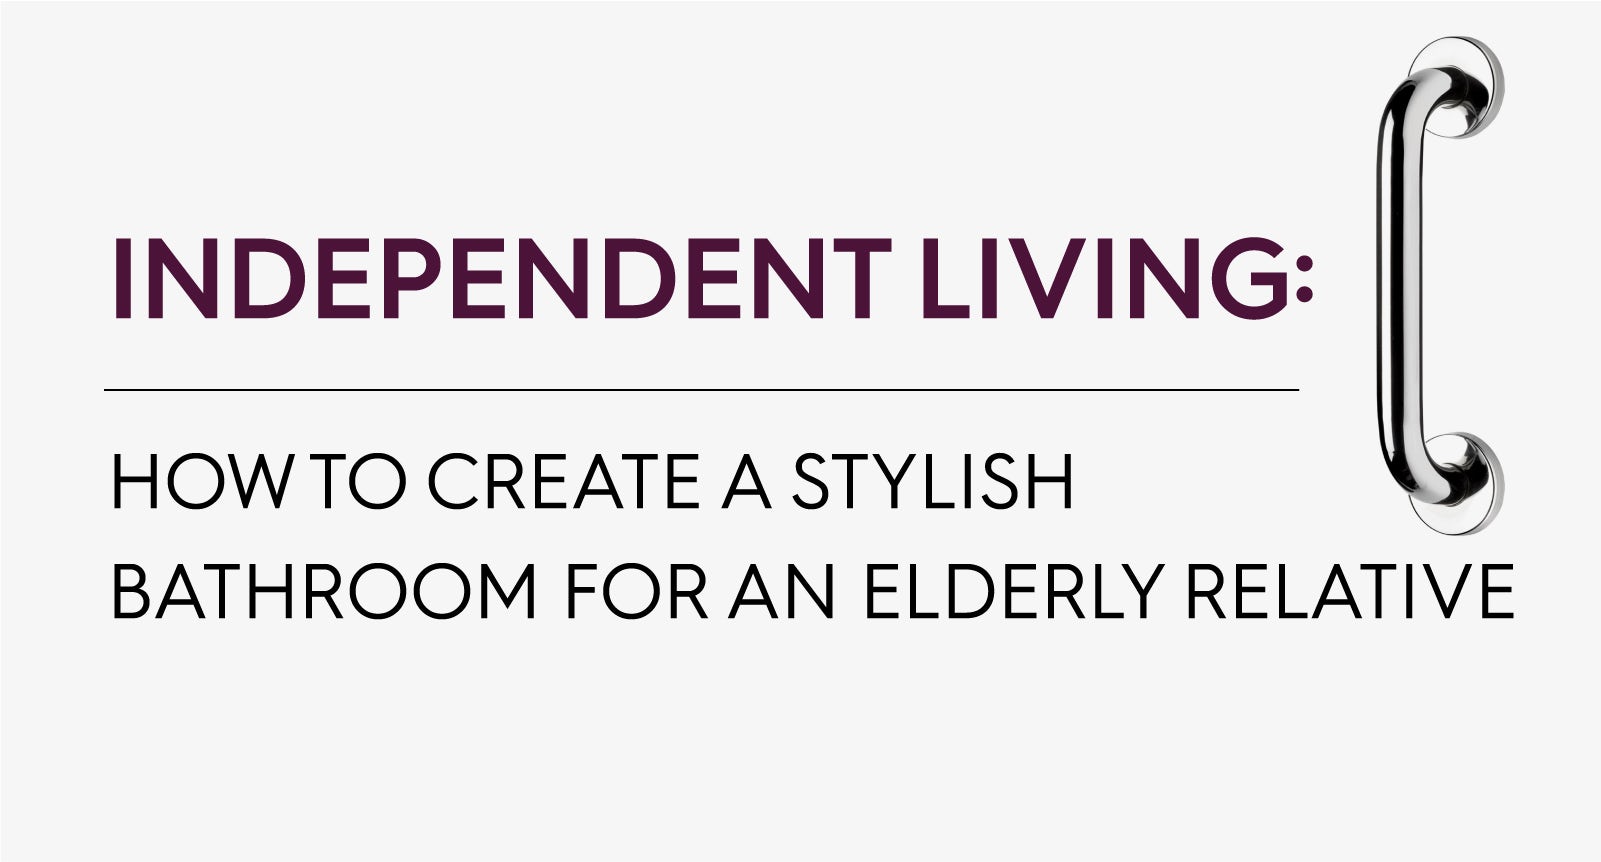 Independent Living: How to create a stylish bathroom for an elderly relative